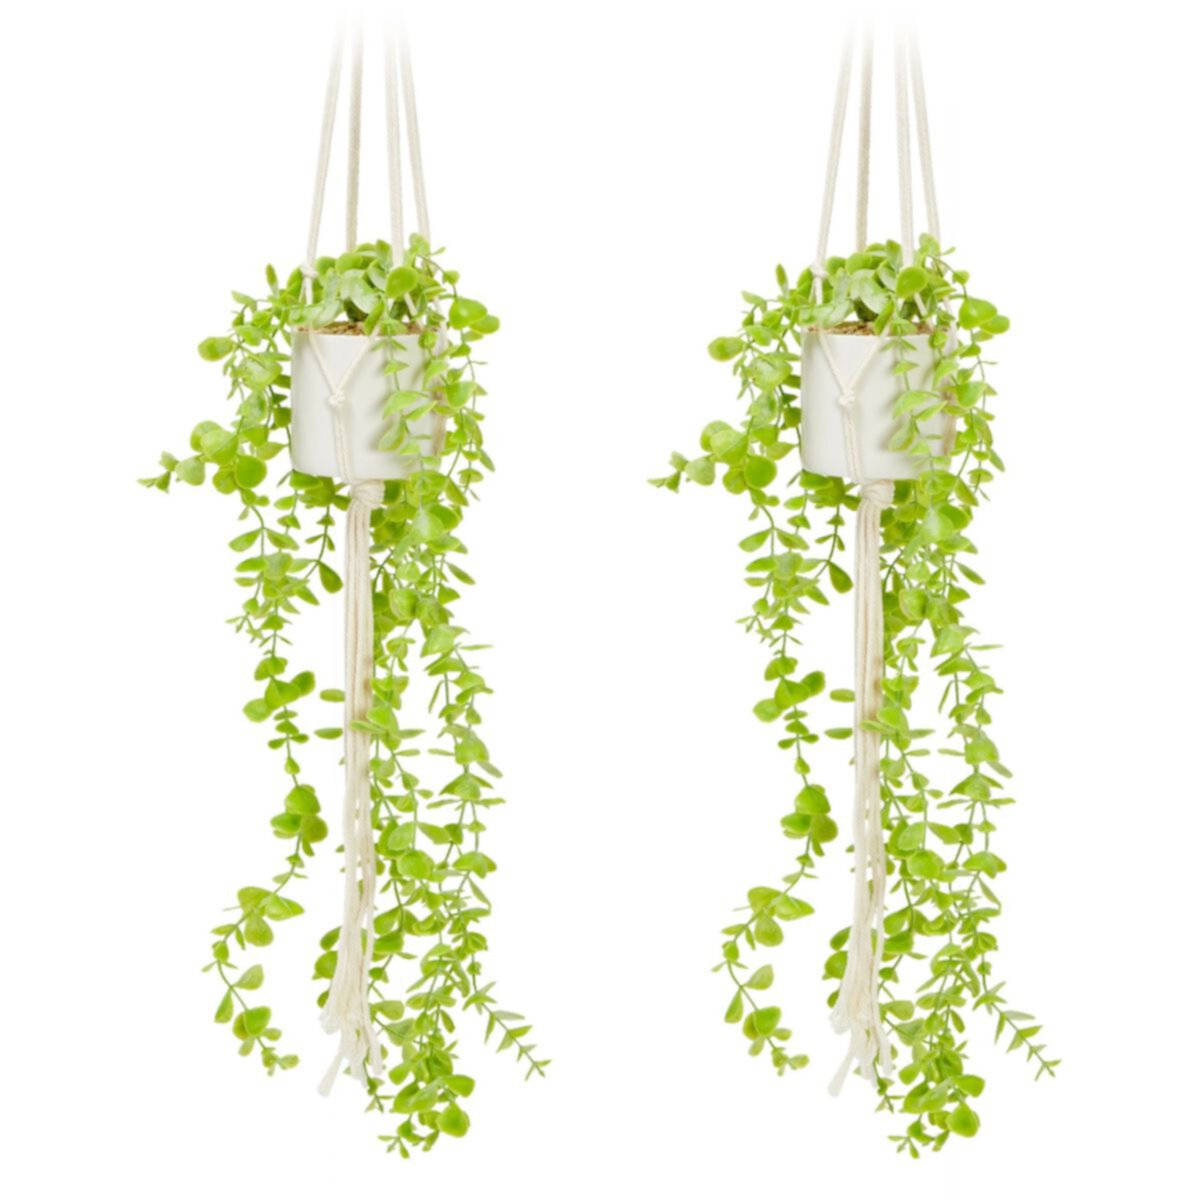 Hanging Artificial Eucalyptus Plant with White Ceramic Pot for Wall Decor, House Warming Gift (31 in, 2 Pack) Juvale